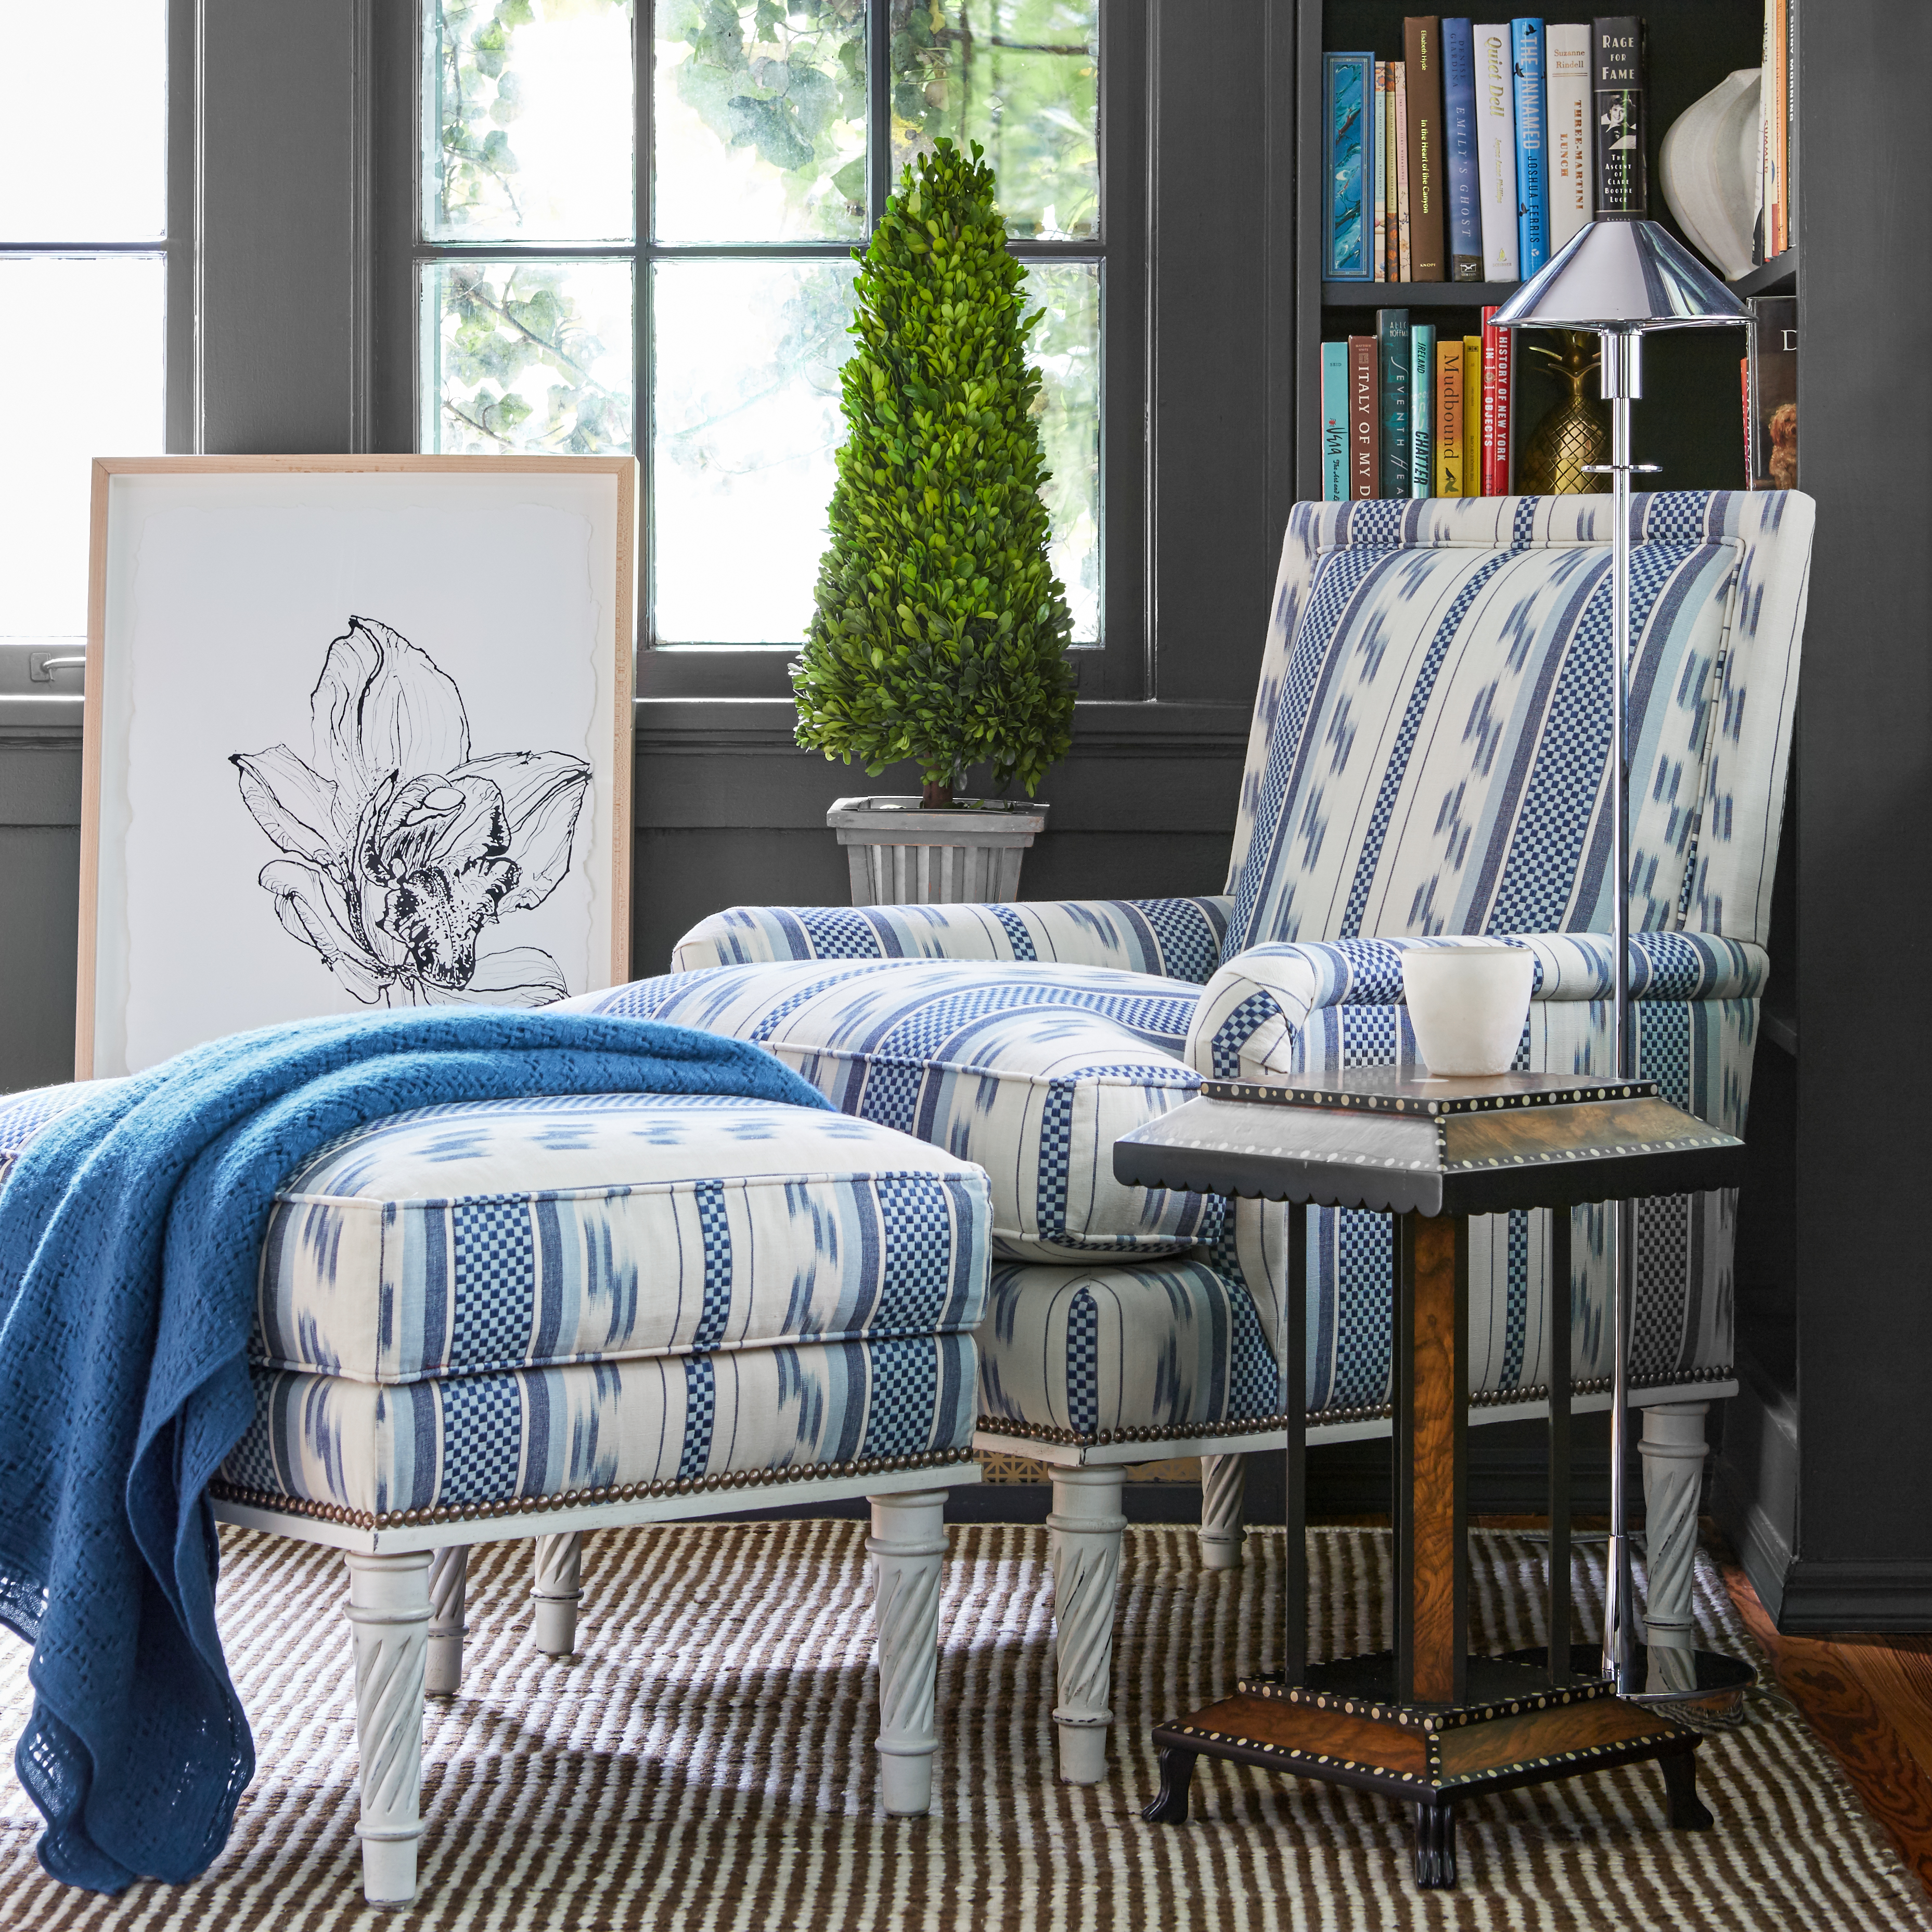 Azure chair in striped blue and white from Bunny Williams Home